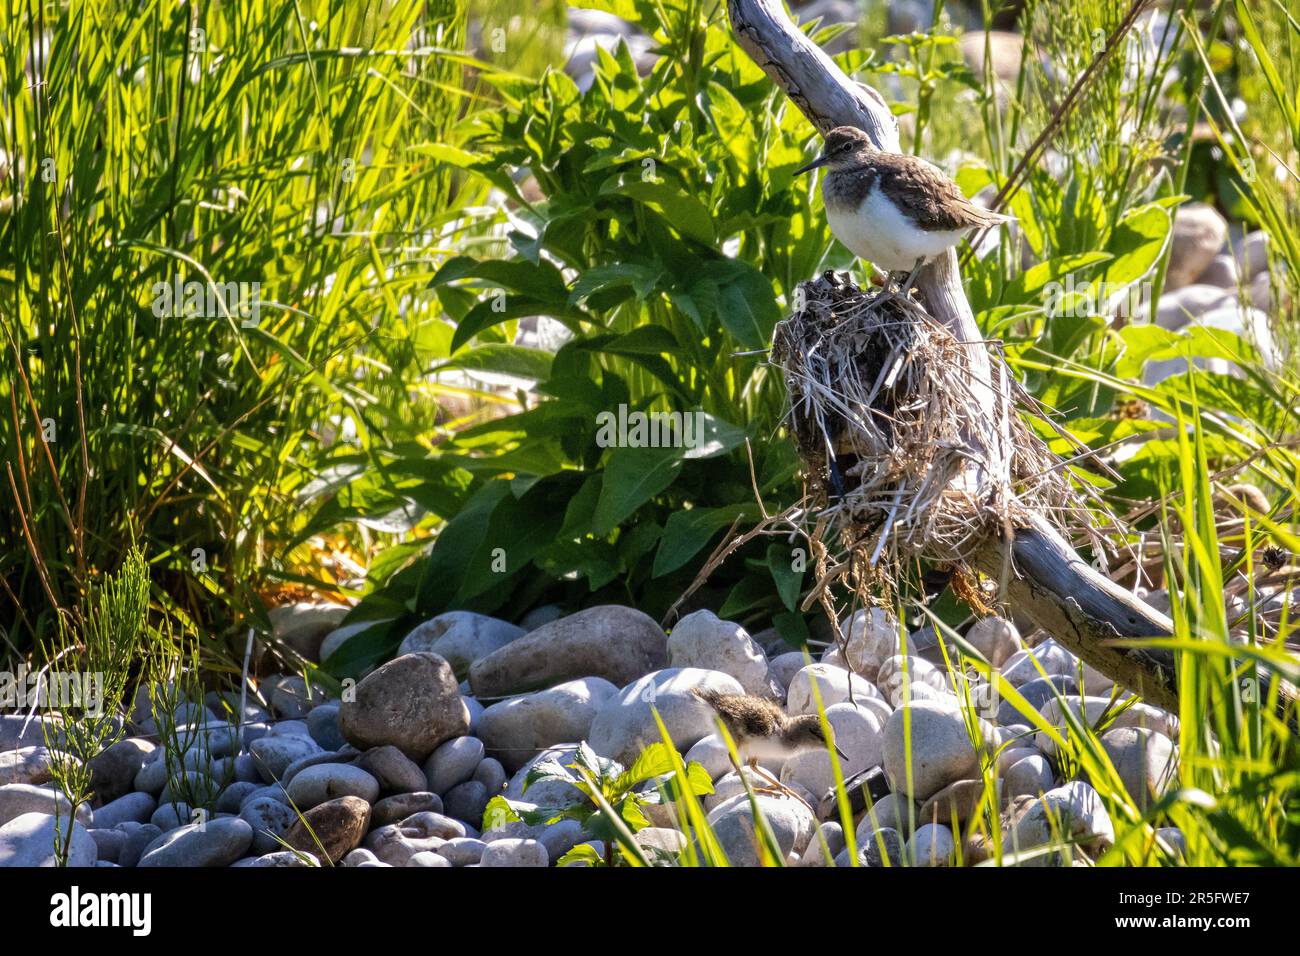 UK wildlife: Common sandpiper chick on river cobbles with adult parent calling from branch above, River Wharfe, North Yorkshire, England. Stock Photo